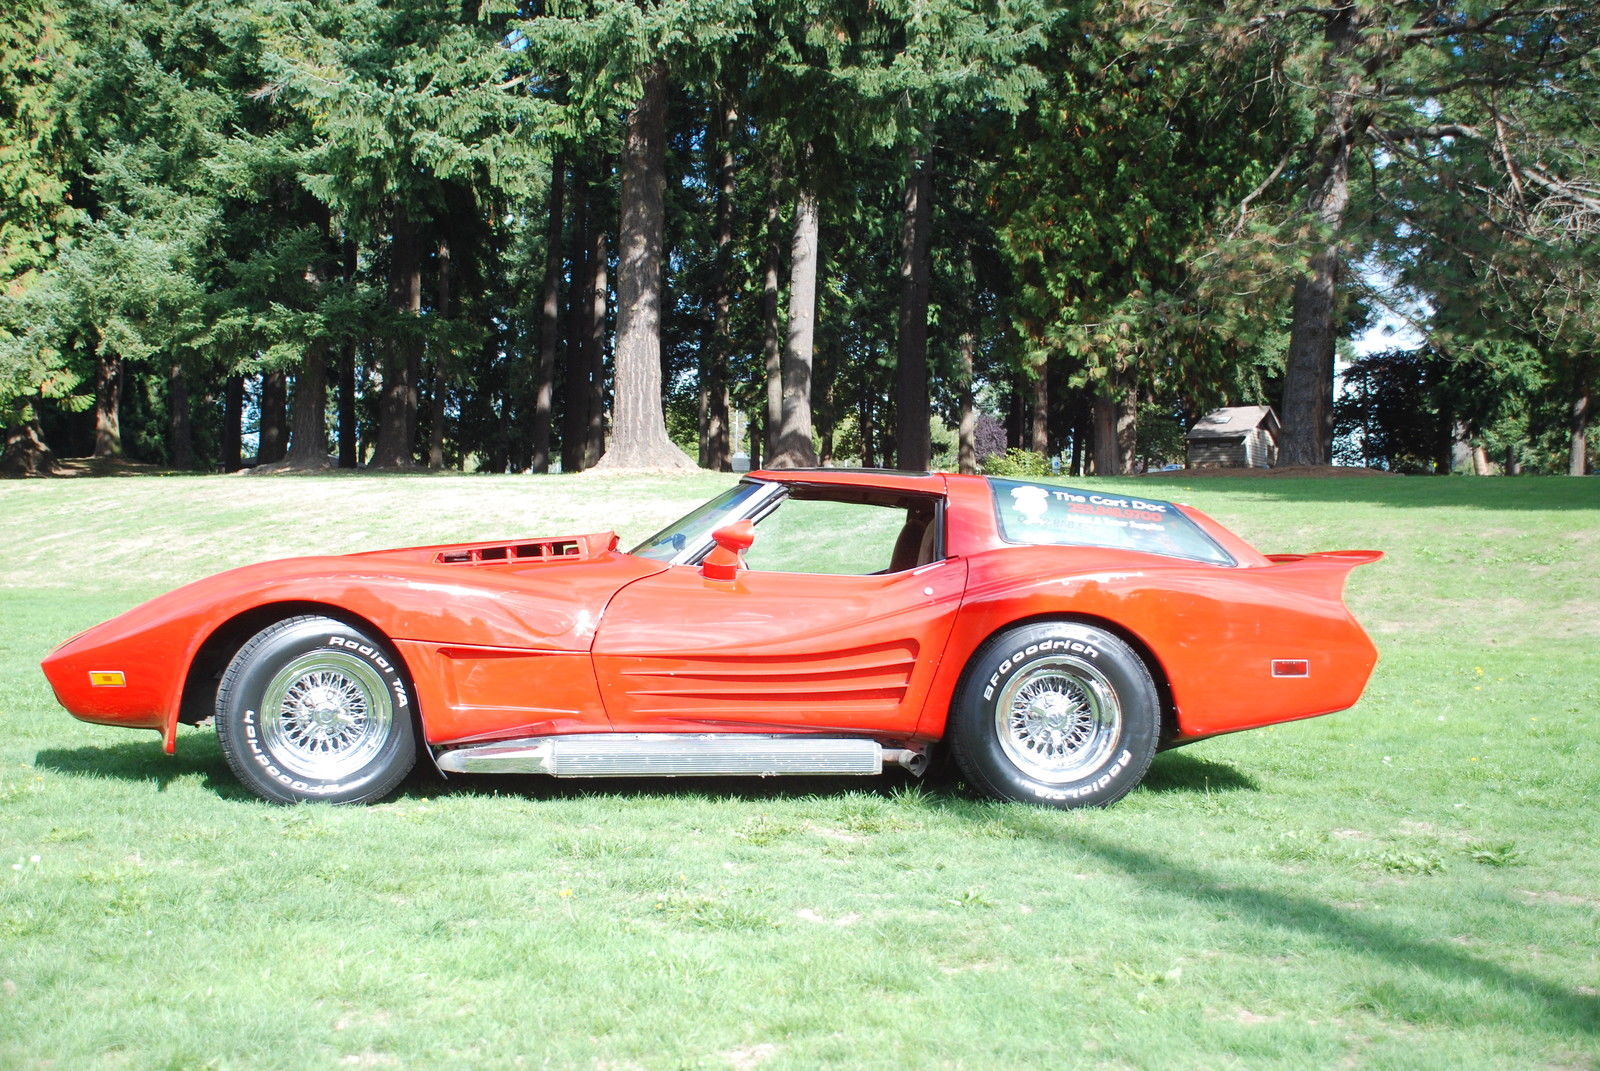 Own It! This 1976 Greenwood Corvette Sport Wagon Is For Sale – Four Seater Freak!